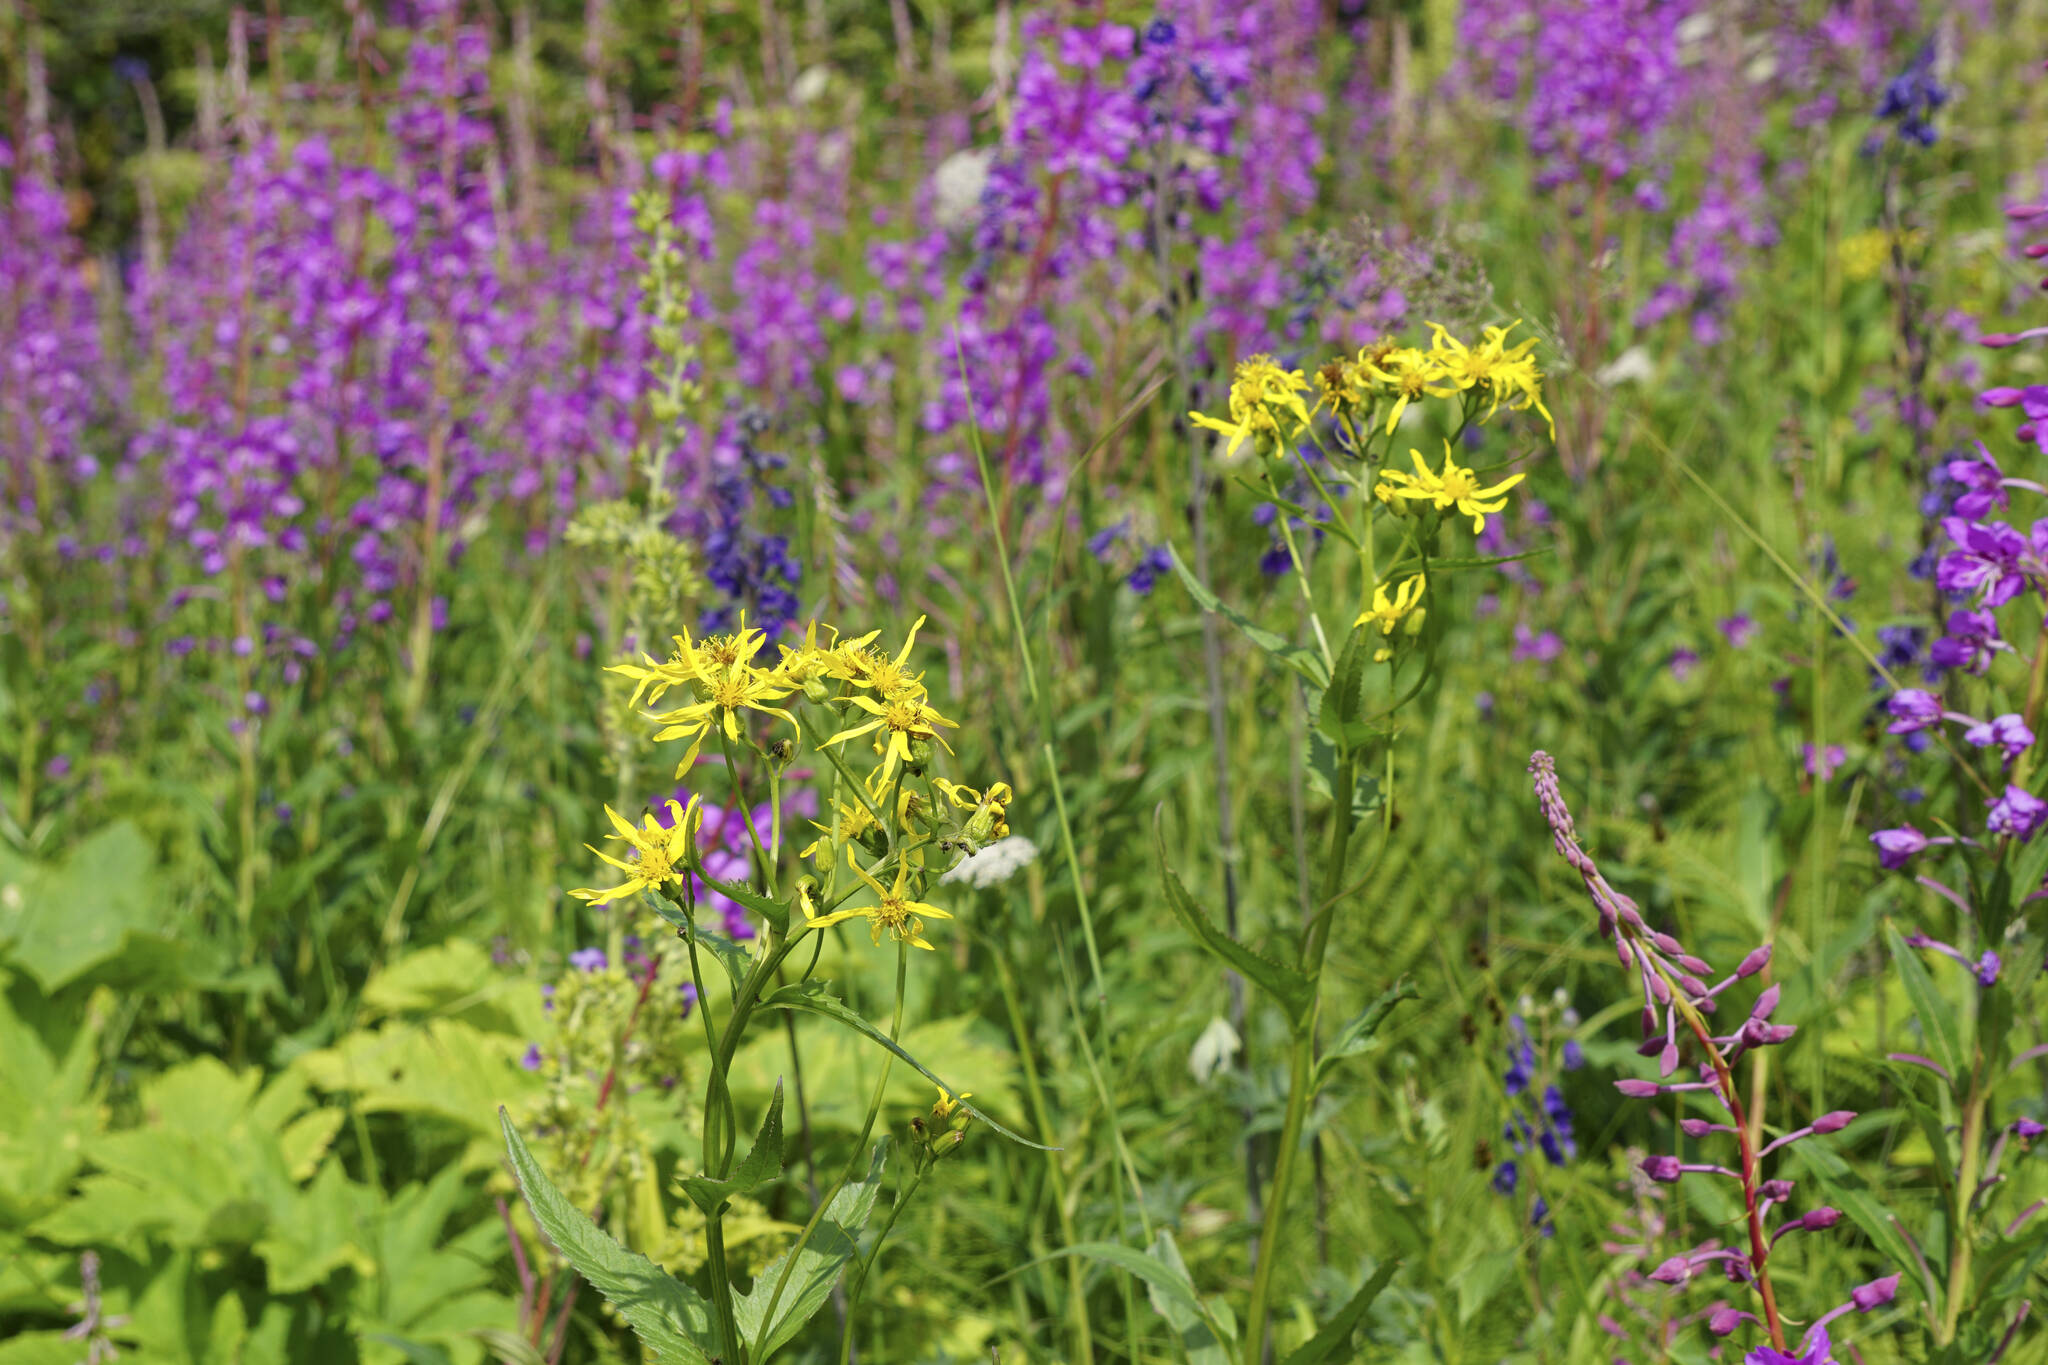 Wildflowers bloom along the Eveline Trail Saturday, July 23, 2022, in the Eveline State Recreation Area near Mile 14 East End Road, Fritz Creek, Alaska. (Photo by Michael Armstrong/Homer News)